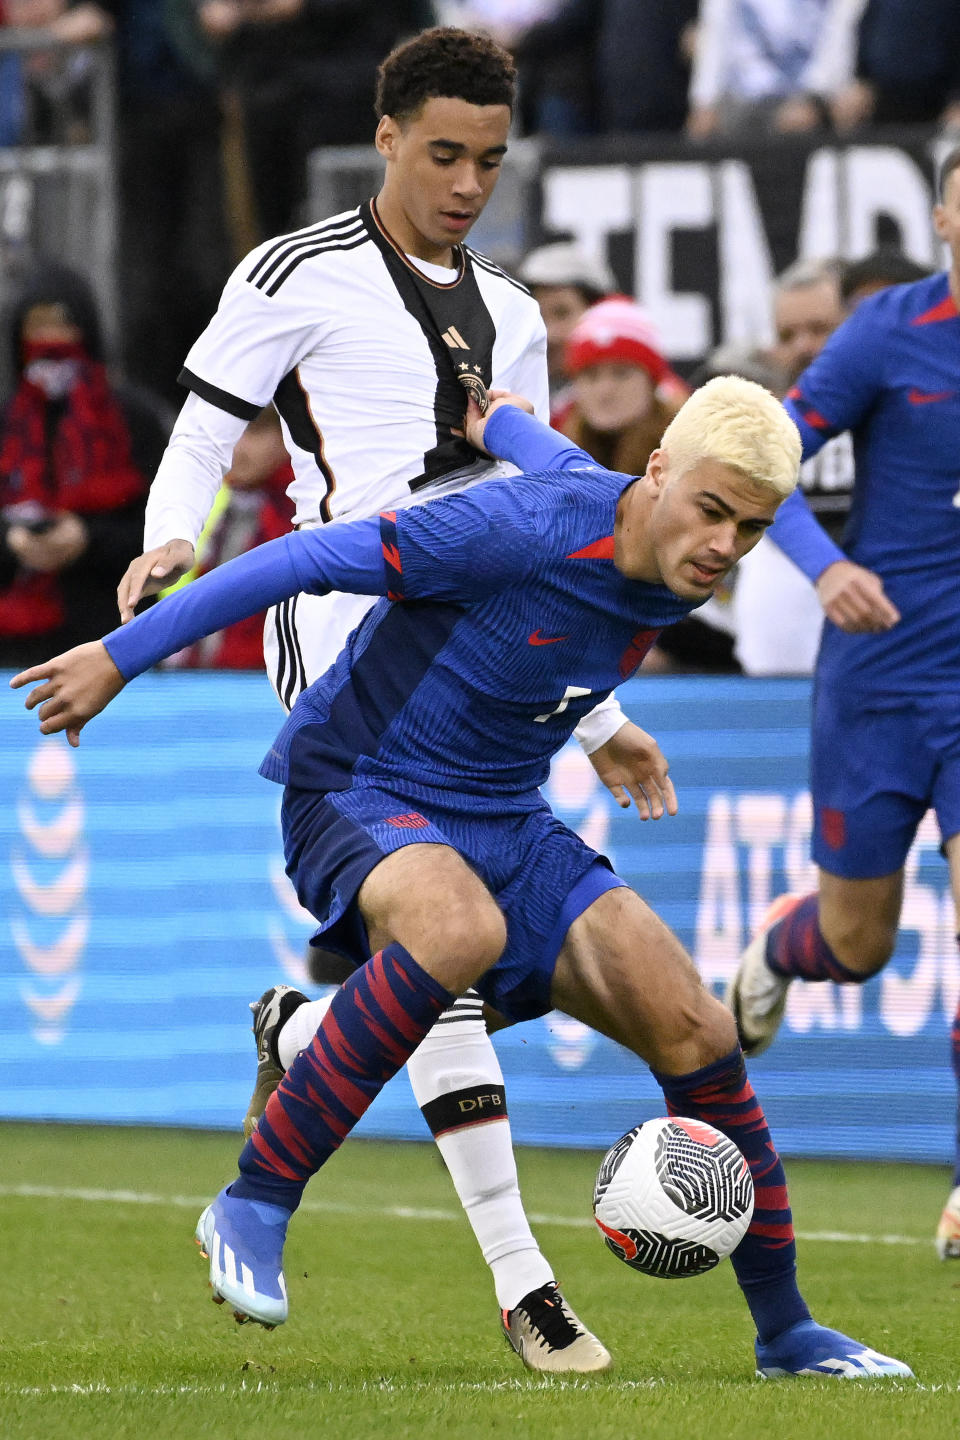 United States' Gio Reyna, front, shields the ball from from Germany's Jamal Musiala during an international friendly soccer match at Pratt & Whitney Stadium at Rentschler Field, Saturday, Oct. 14, 2023, in East Hartford, Conn. (AP Photo/Jessica Hill)